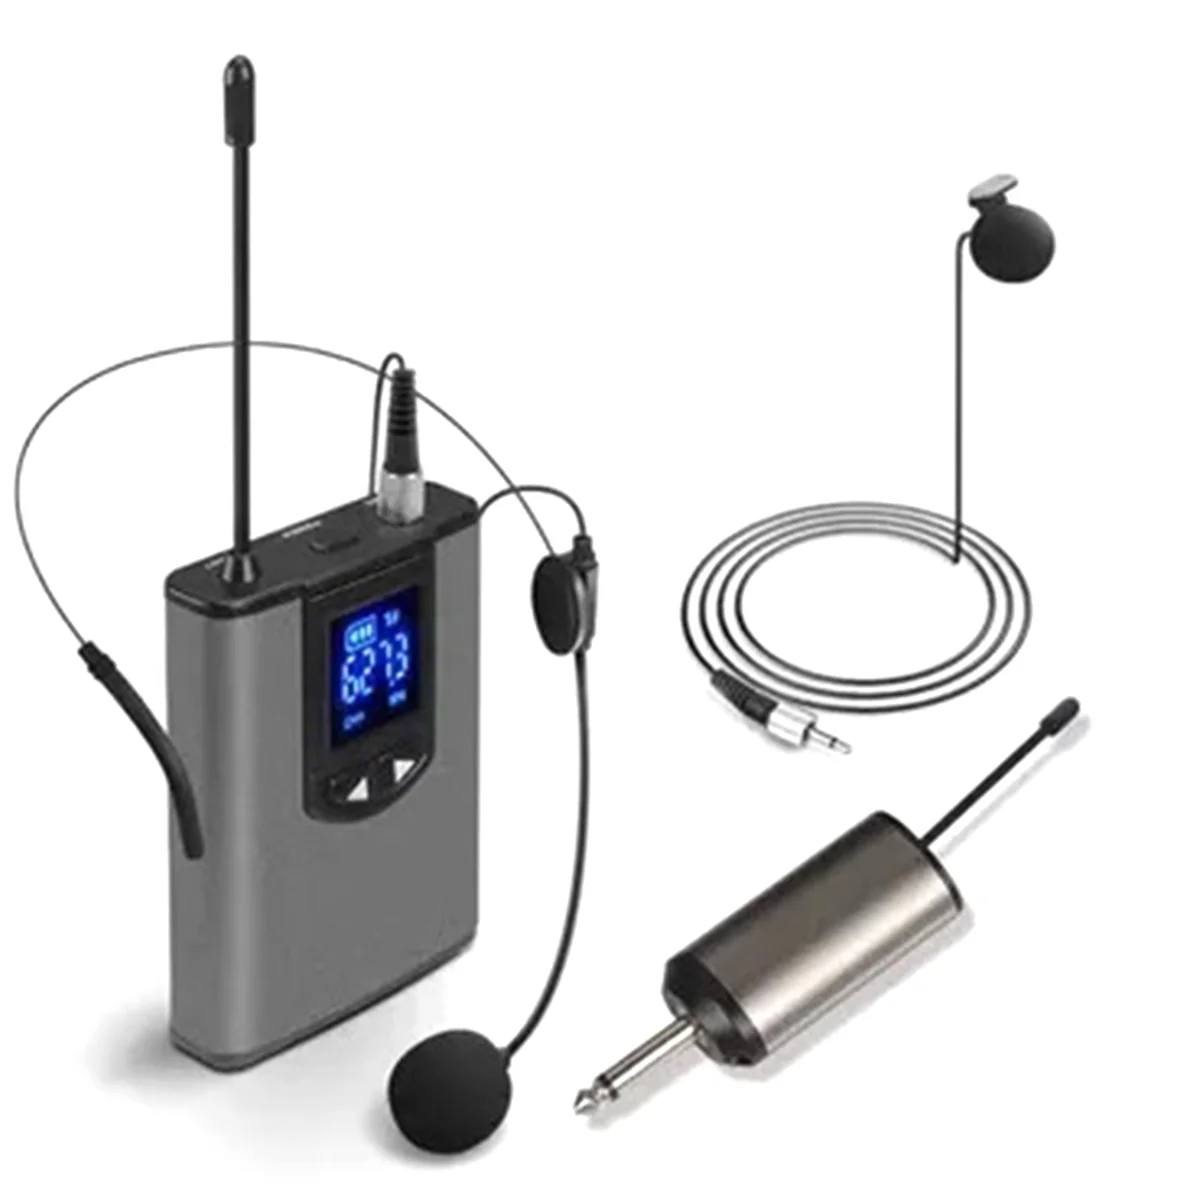 

UHF Portable Wireless Headphone/Lvalier Microphone with Bodypack Transmitter and Receiver 1/4Inch Output 1 to 1